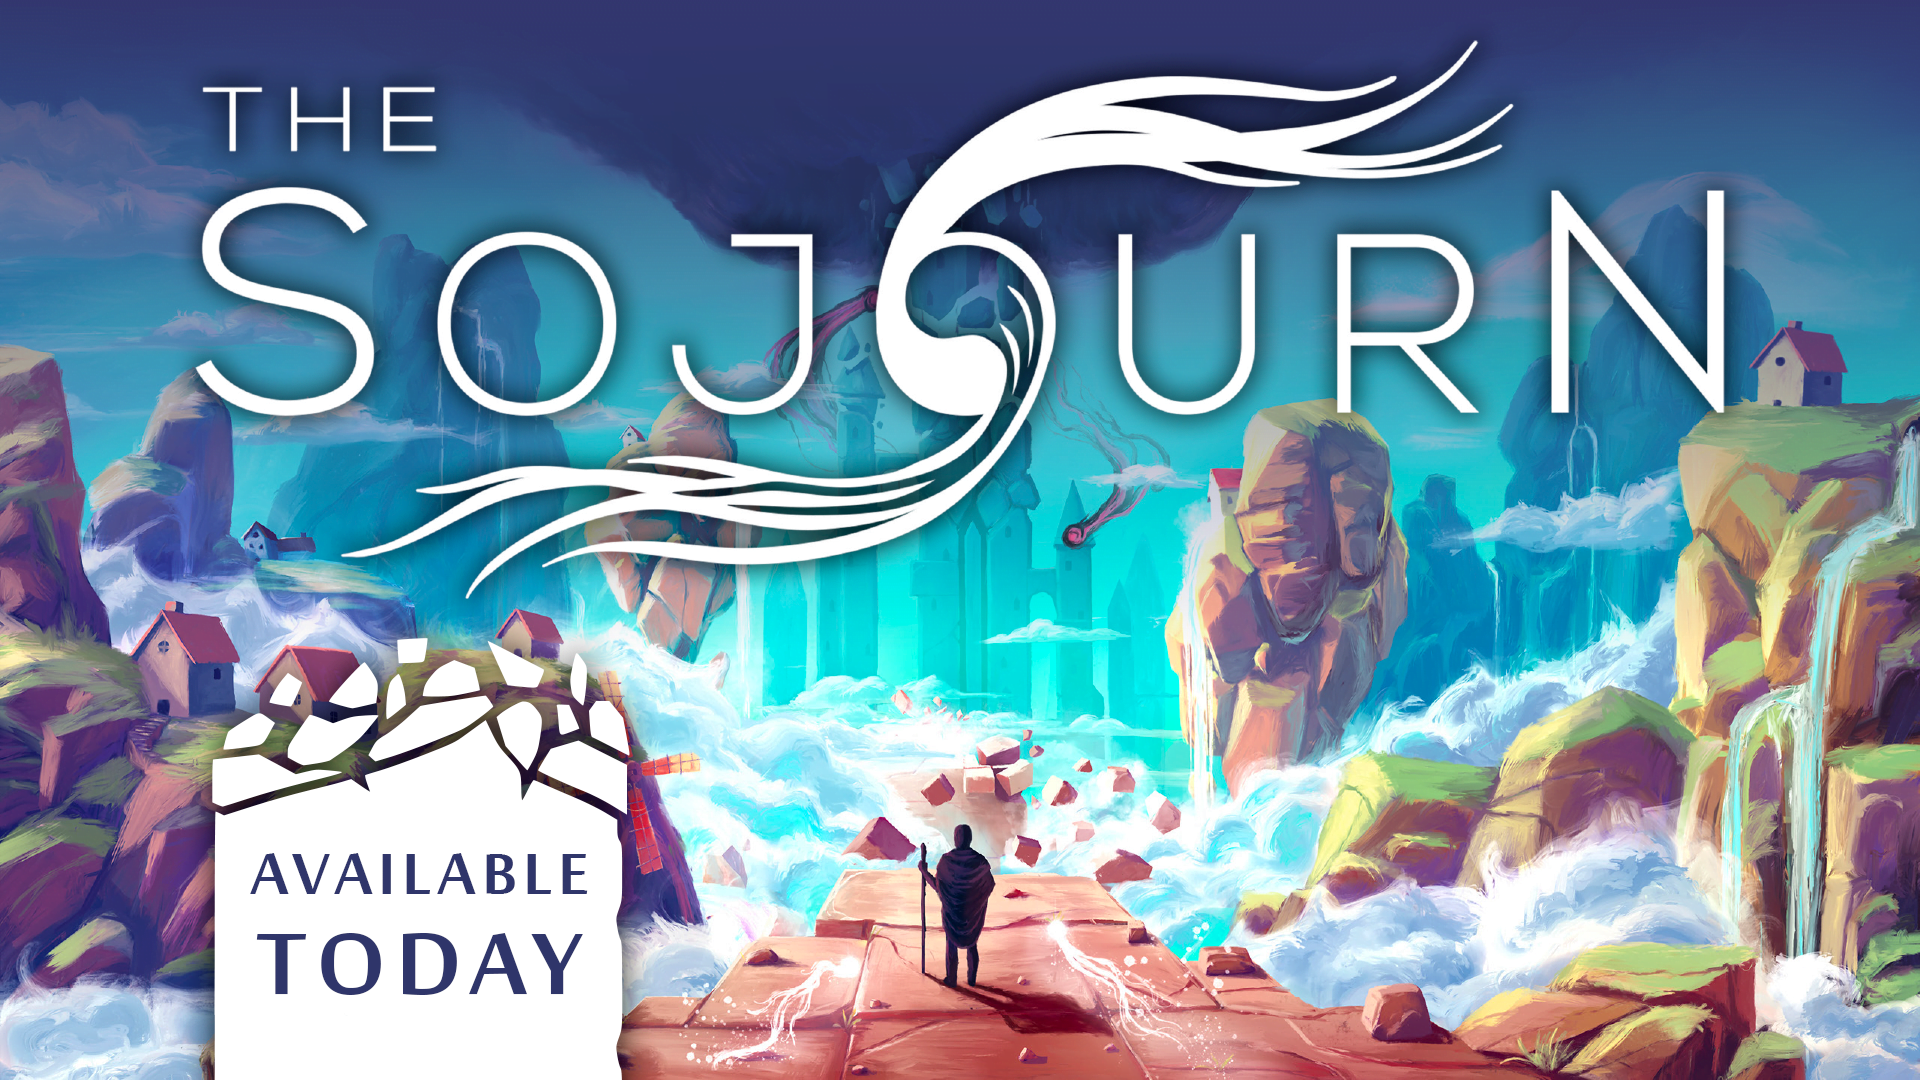 Hawked no pc | multiplayer | the sojourn: jogo puzzle já disponível! | the sojourn available today | multiplayer